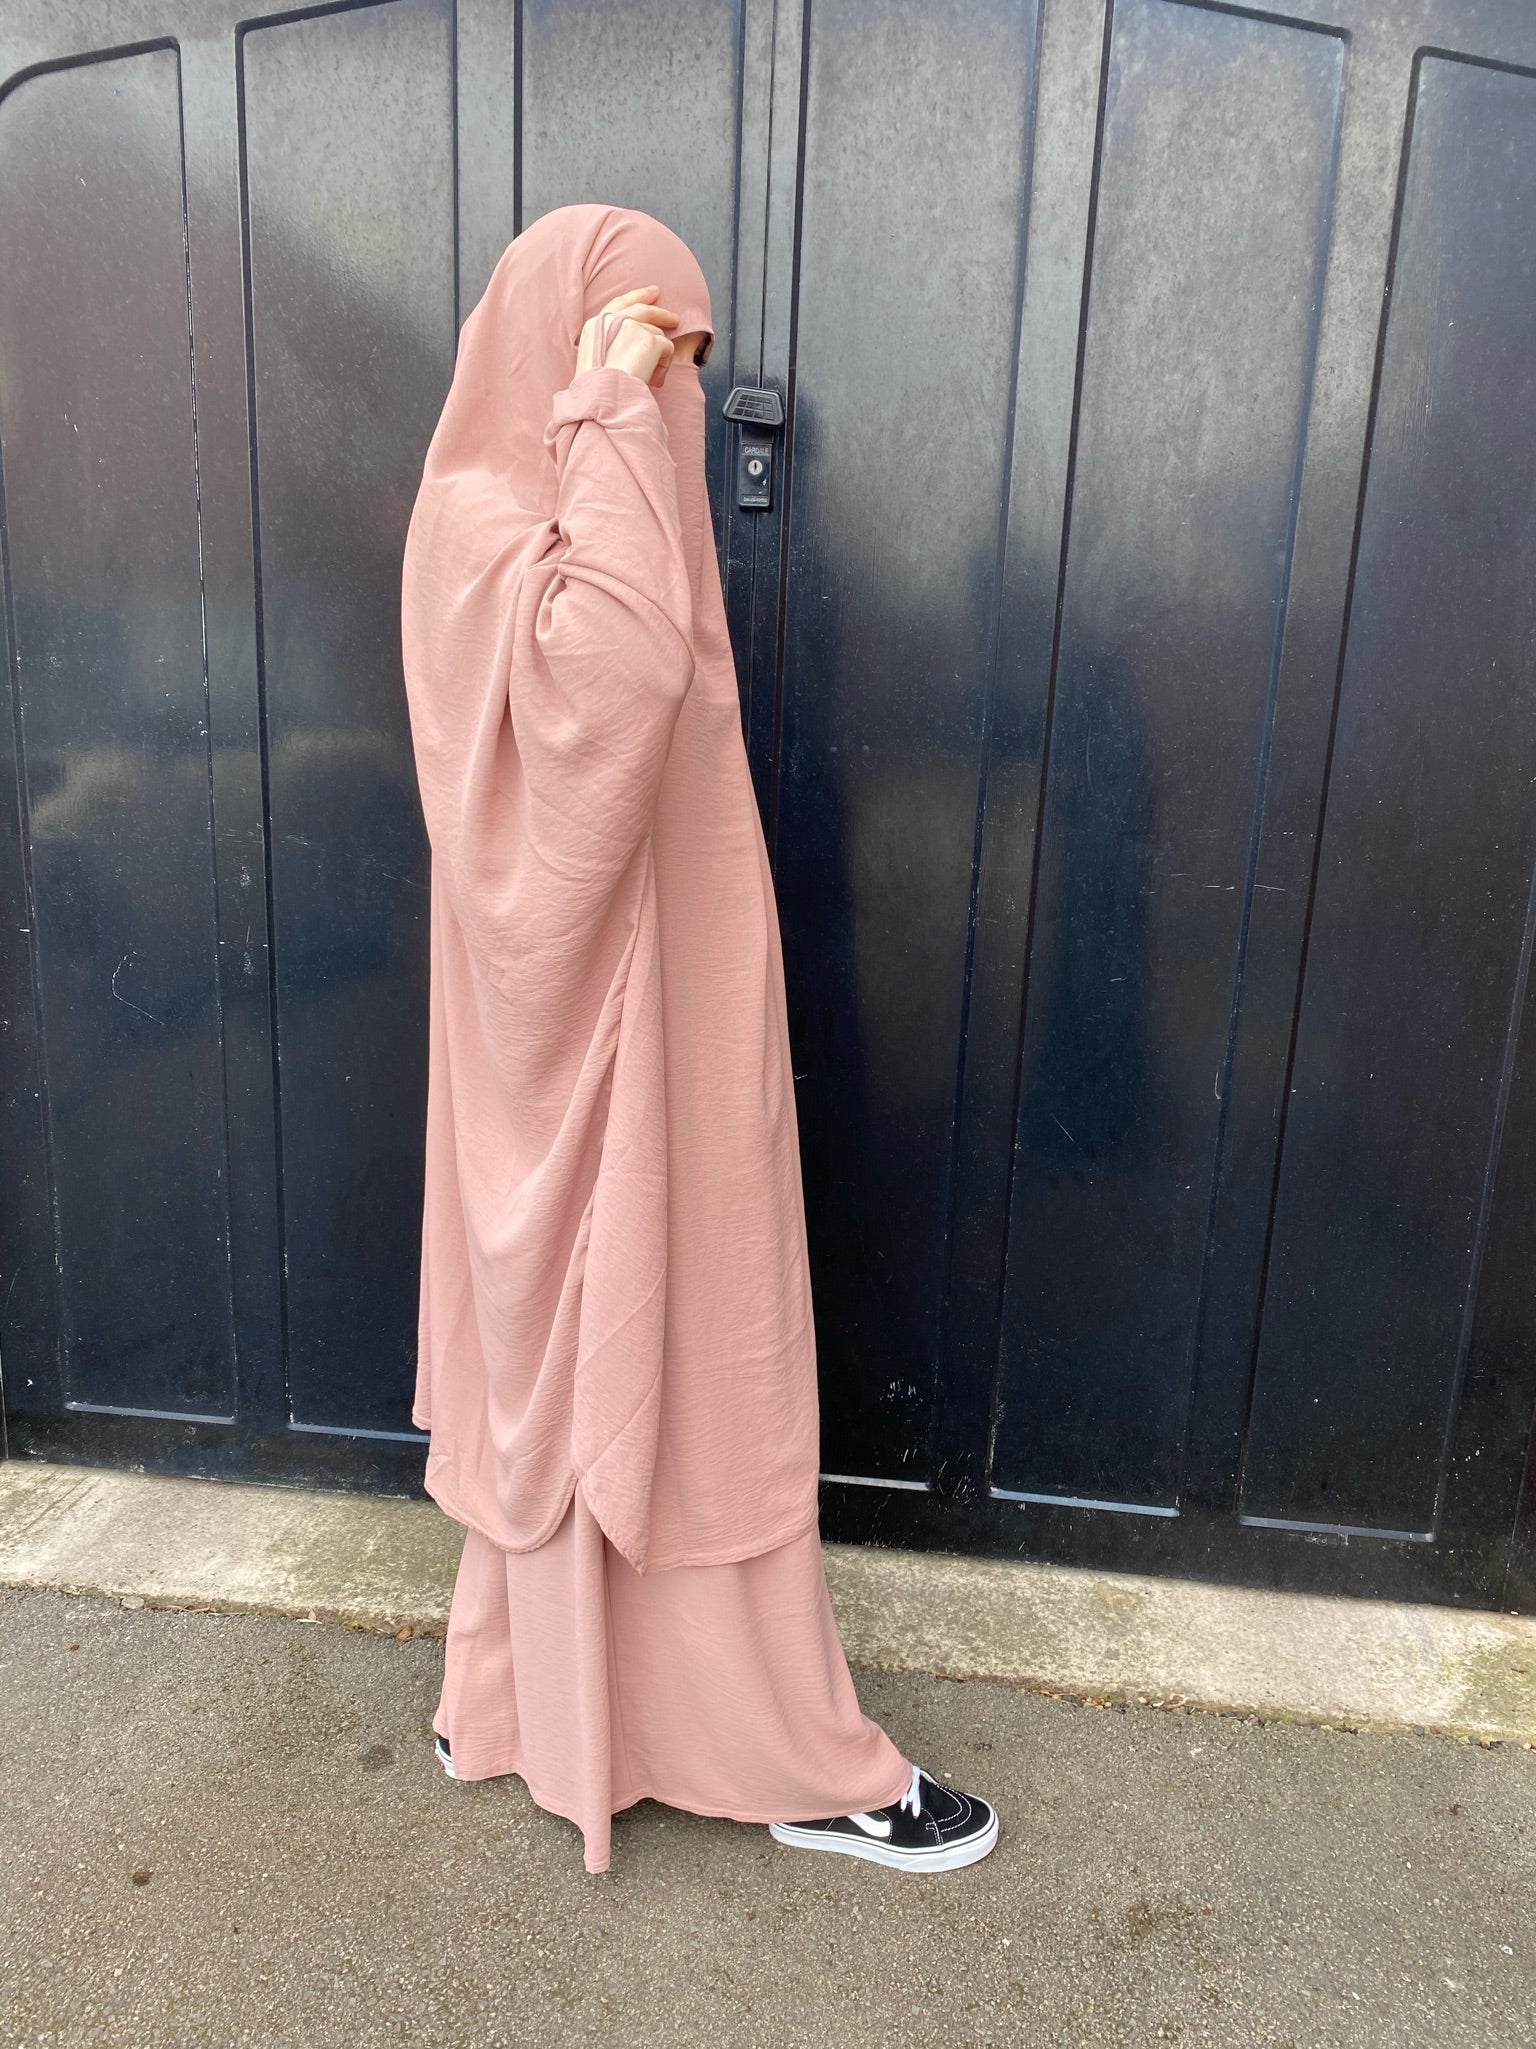 BACK IN STOCK JILBAB HAYYA 2 Pieces Skirt (all sizes / colours )